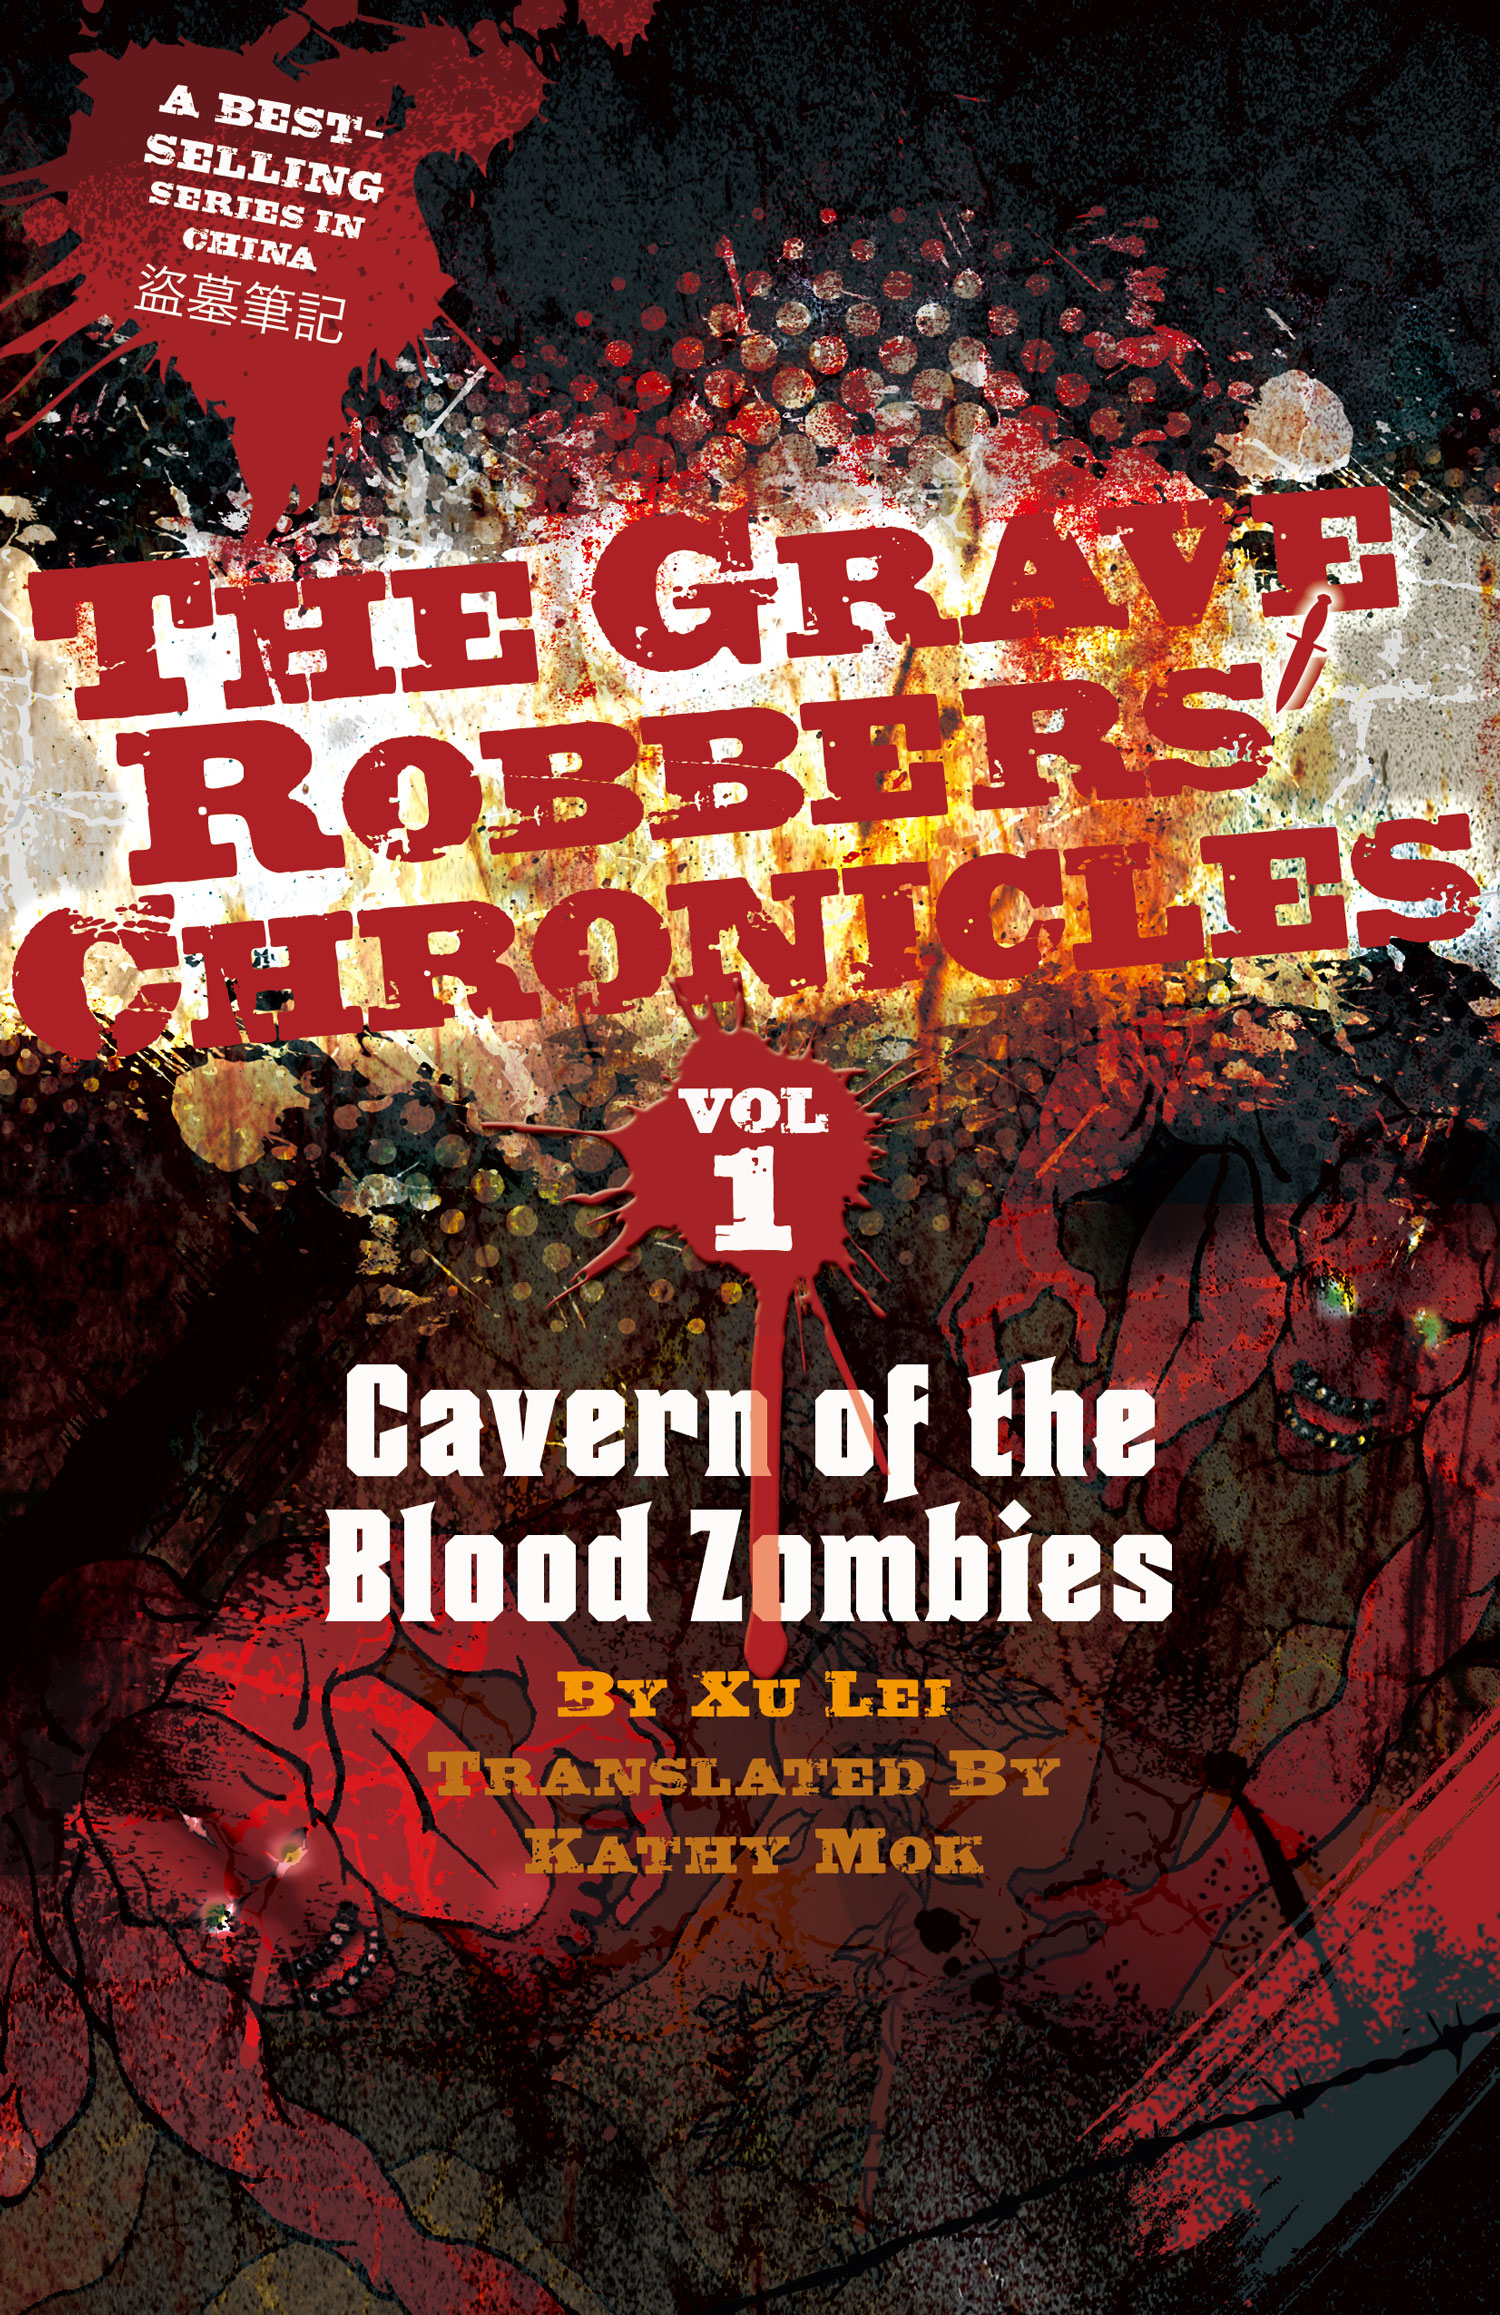 Vol. 1: Cavern of the Blood Zombies